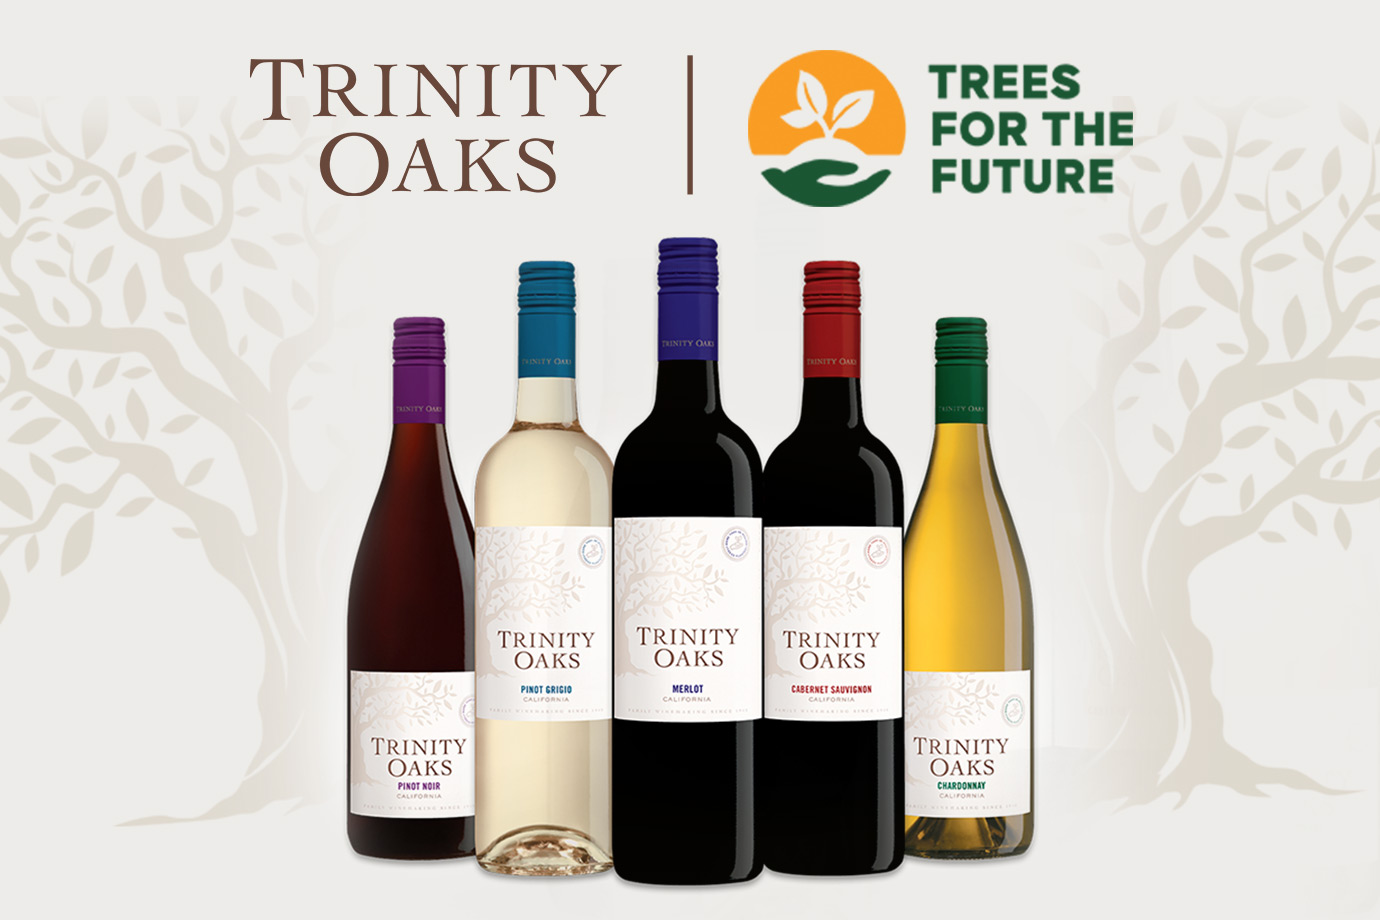 Trinity oak wines and trees for the future